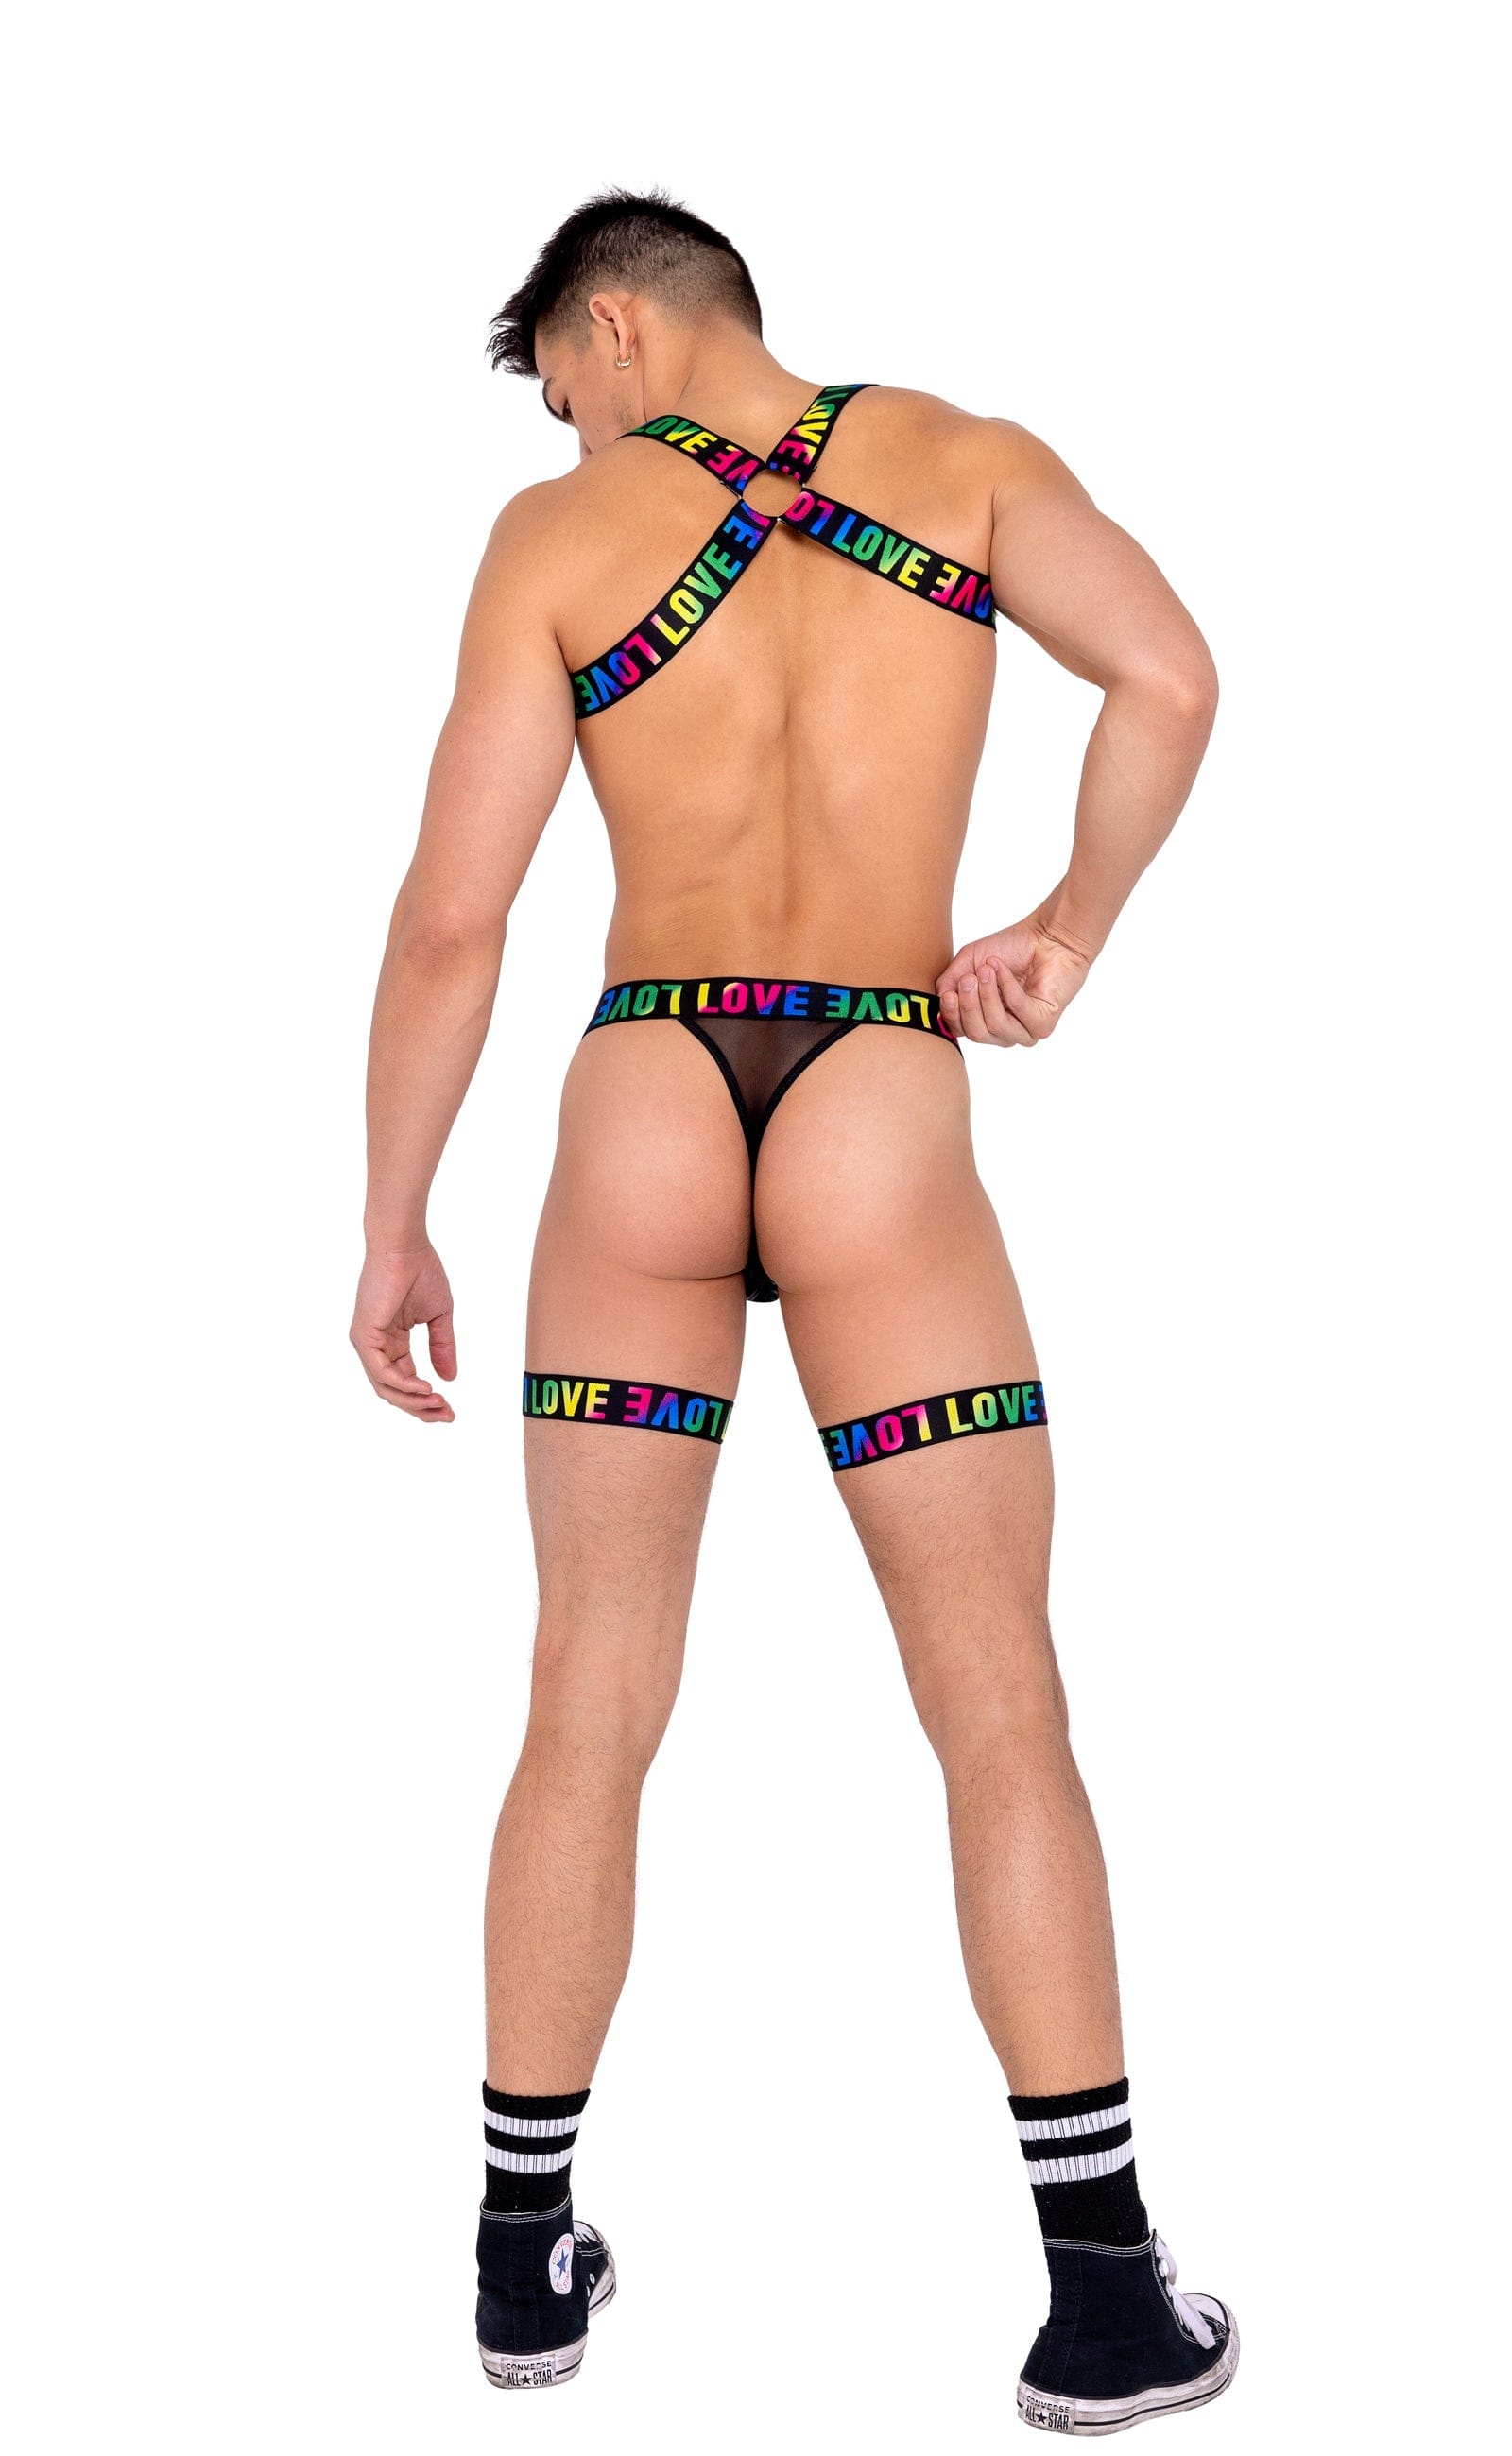 Roma Small / Black Black Men’s Pride Attached Garters & Chain Detail Thong 6158-Blk/Multi-S 2022 Black Men’s Pride Attached Garters Chain Detail Thong Ravewear Apparel & Accessories > Clothing > Shirts & Tops